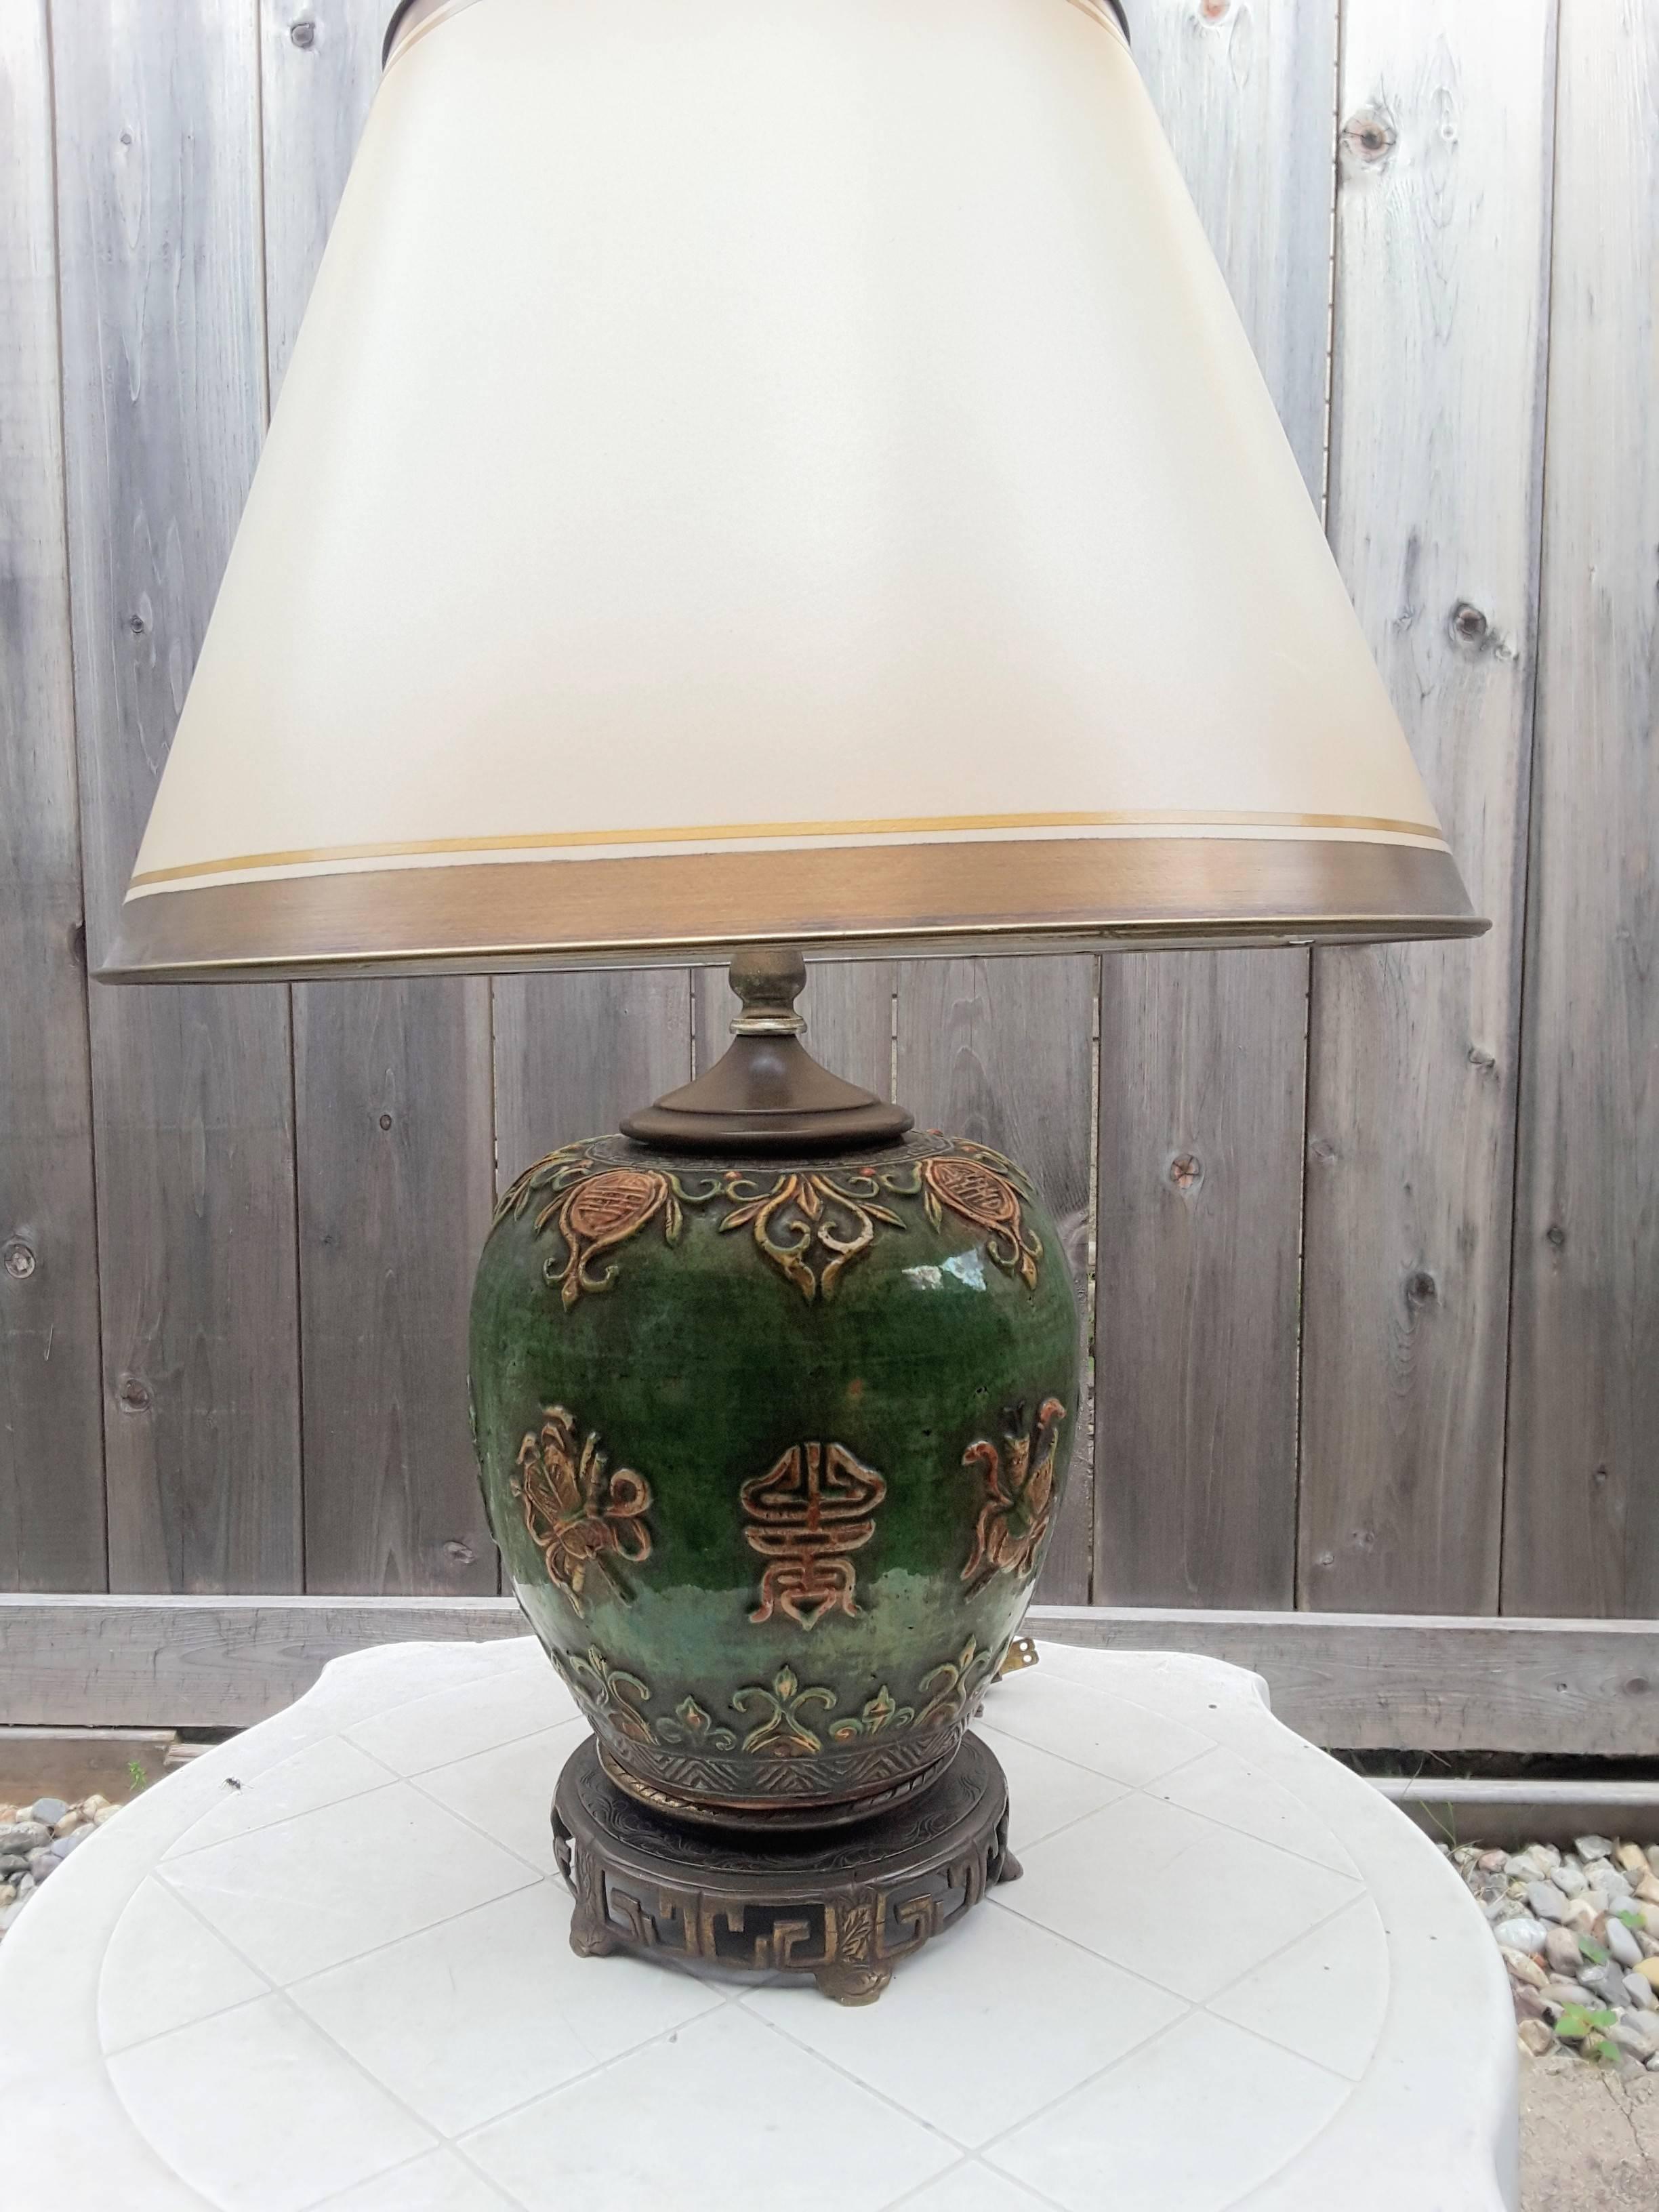 Chinese ginger jar Mid-Century table lamp, the lamp has a bronze patinated base with scroll work to a green colored ginger jar body with scrolls and medallions in a rust brown highlights. The jar has a bronze colored cap to match the base. The lamp